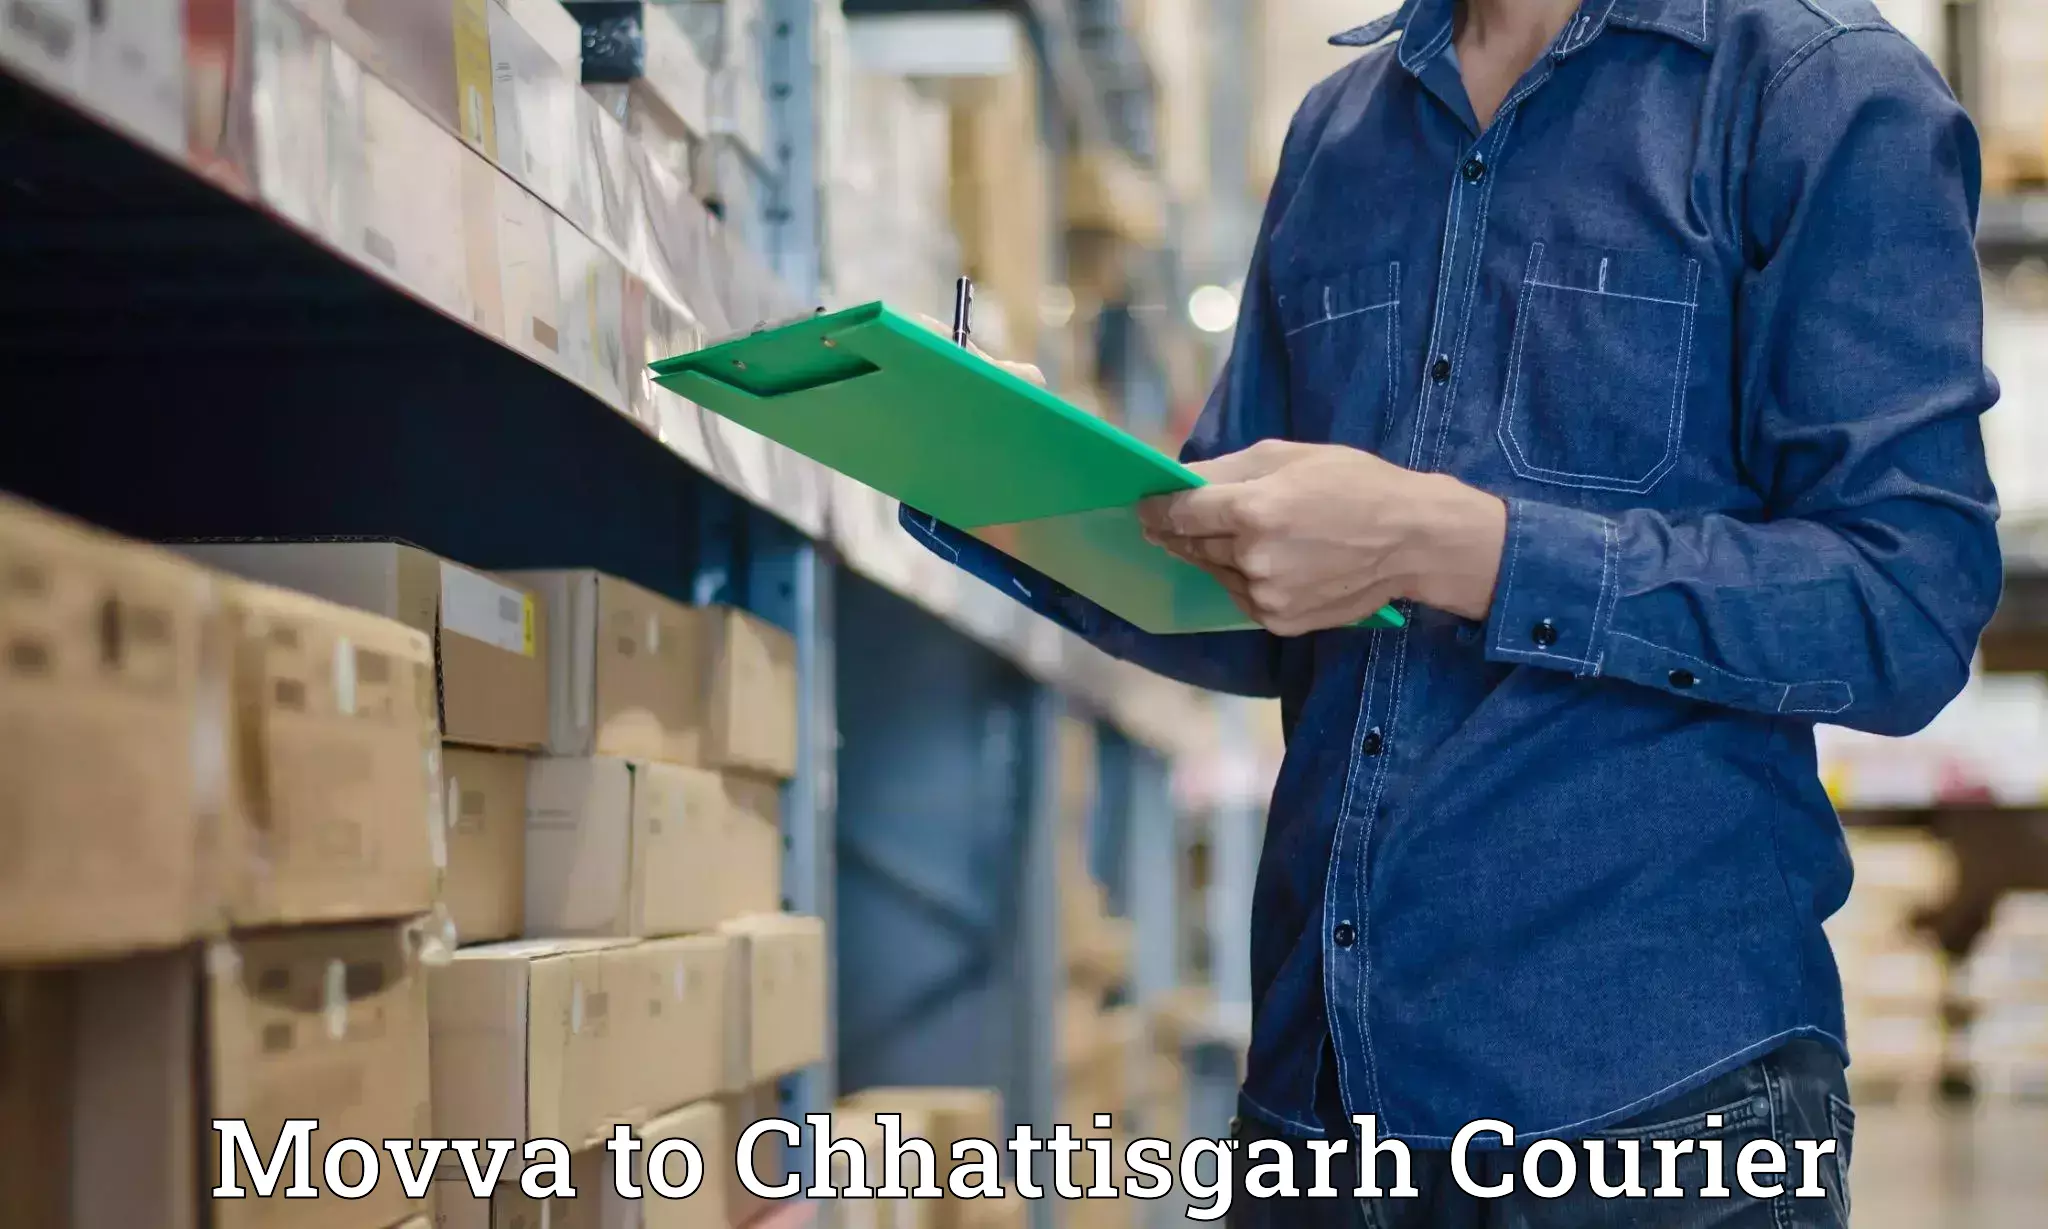 Courier service efficiency Movva to Mahasamund